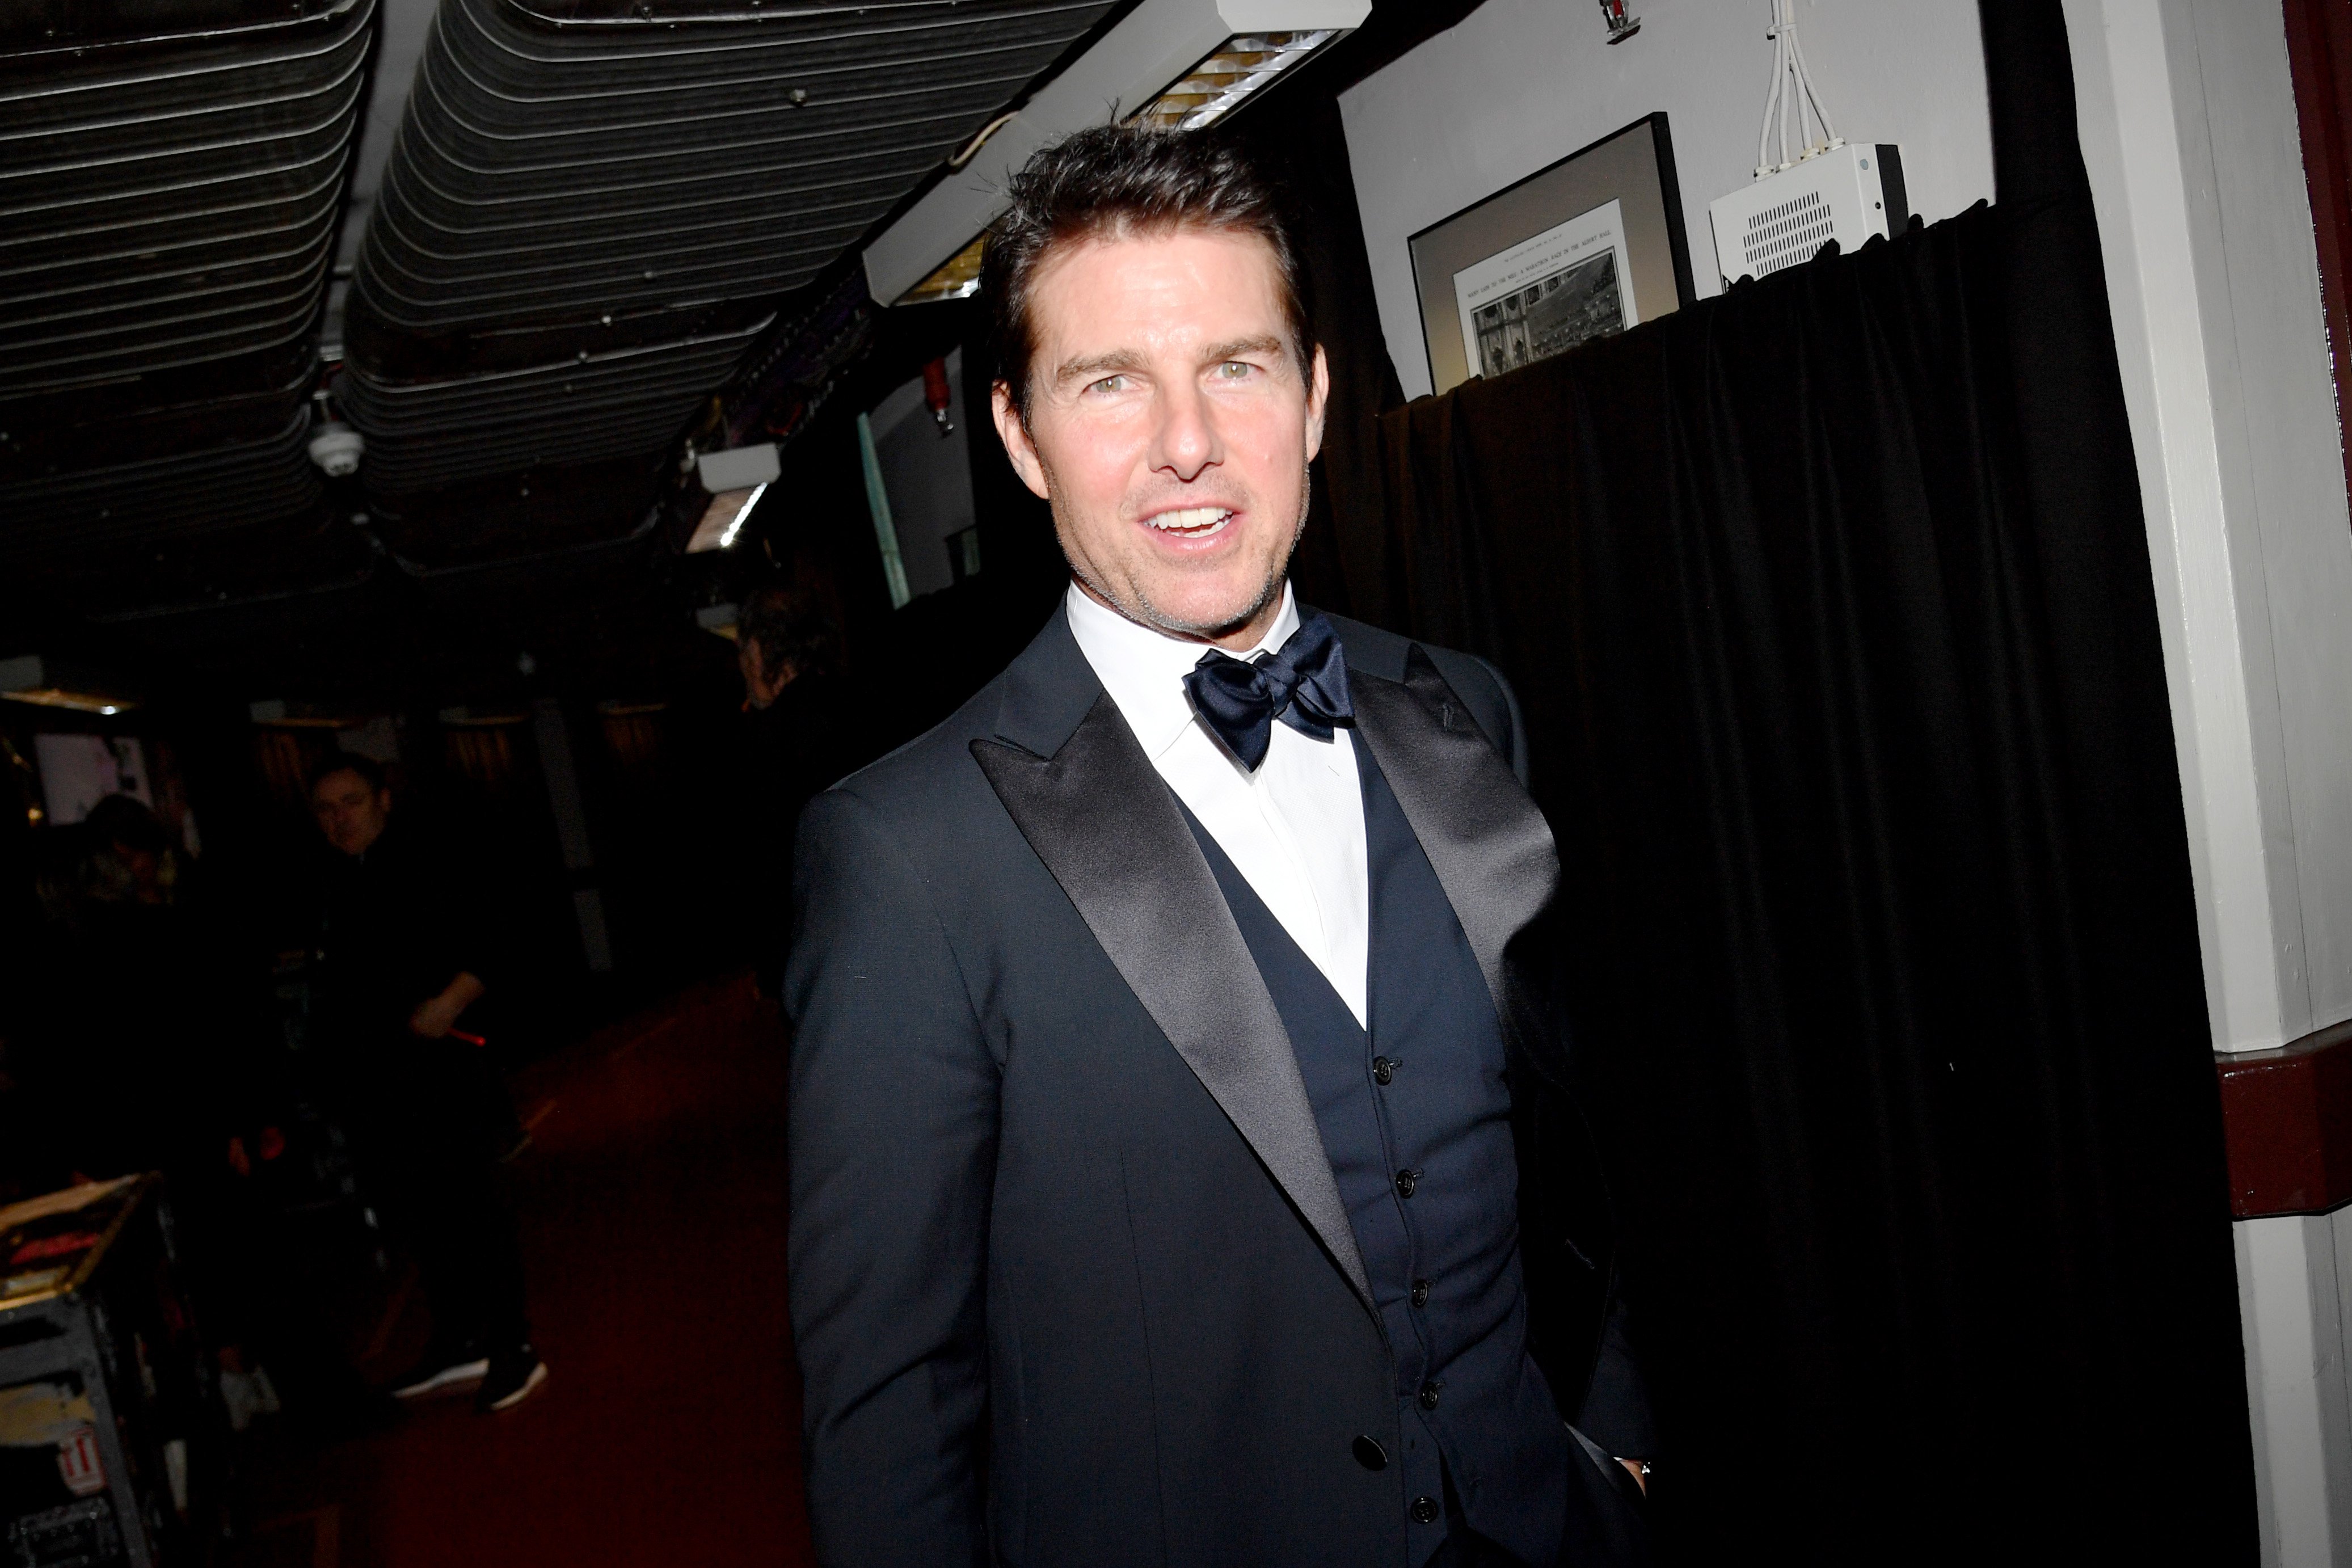 Tom Cruise in 2019 | Gareth Cattermole/BFC/Getty Images